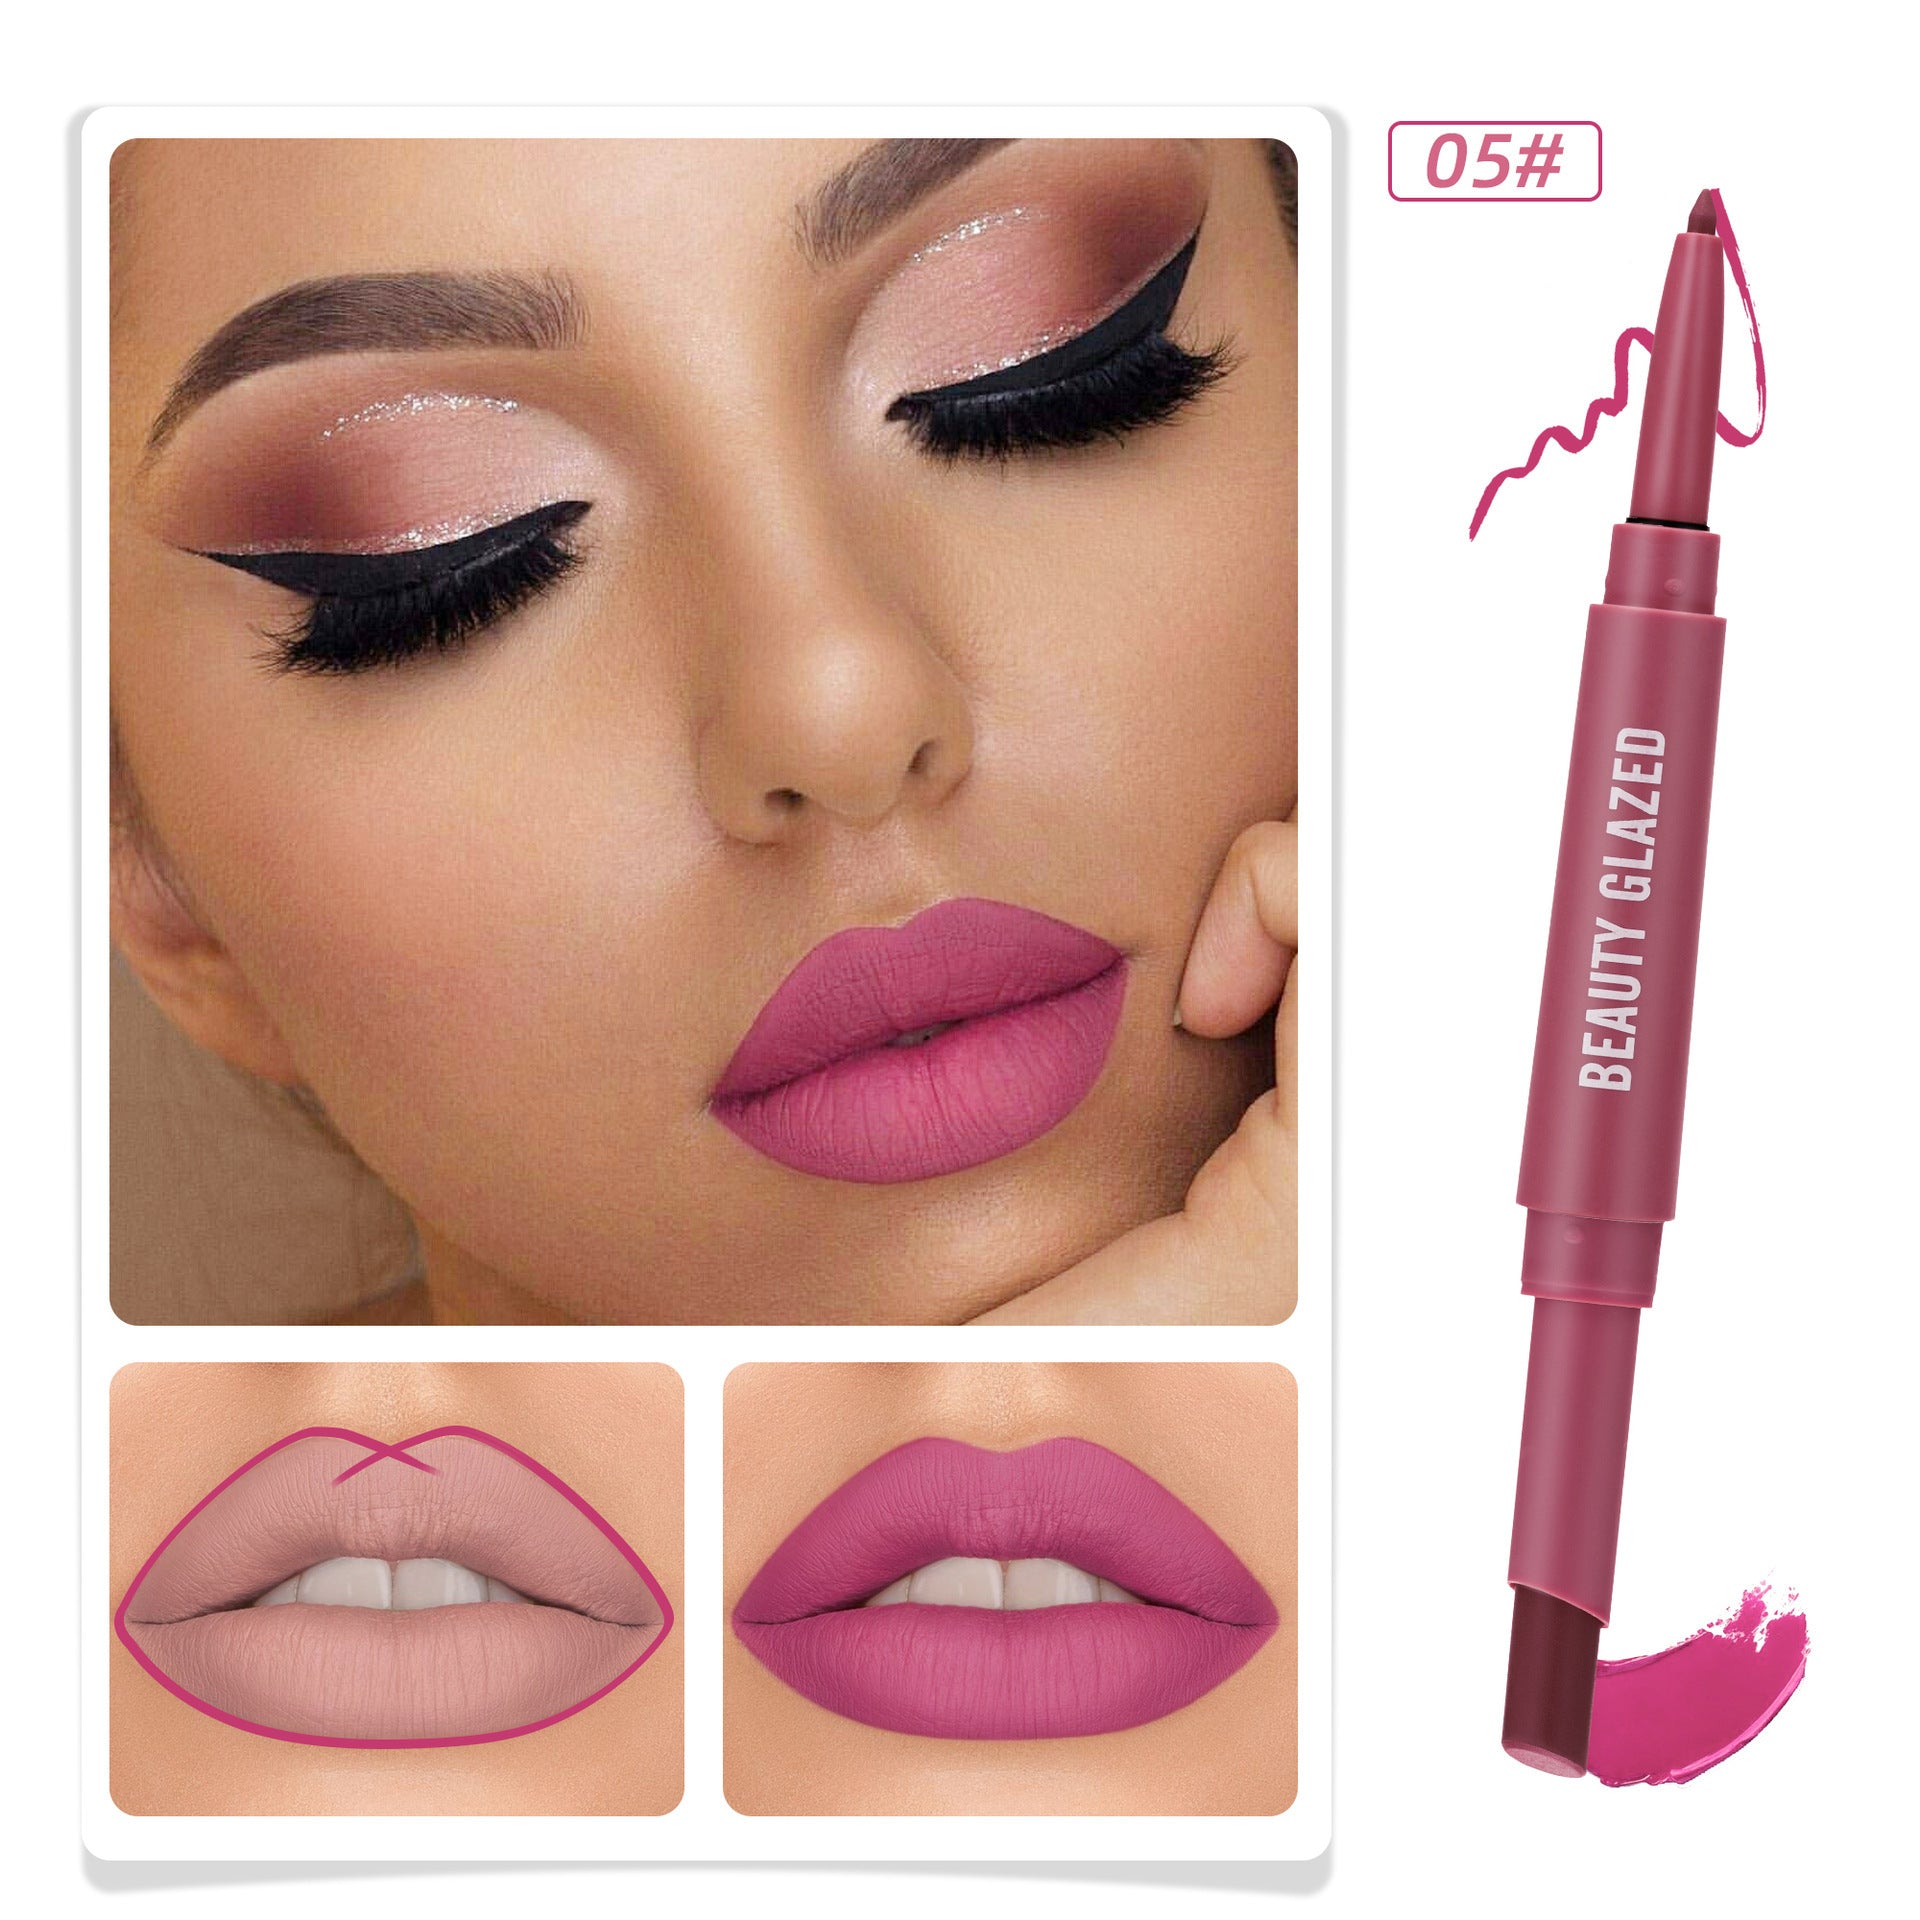 Double-headed Matte No Stain On Cup Lipstick Lip Liner